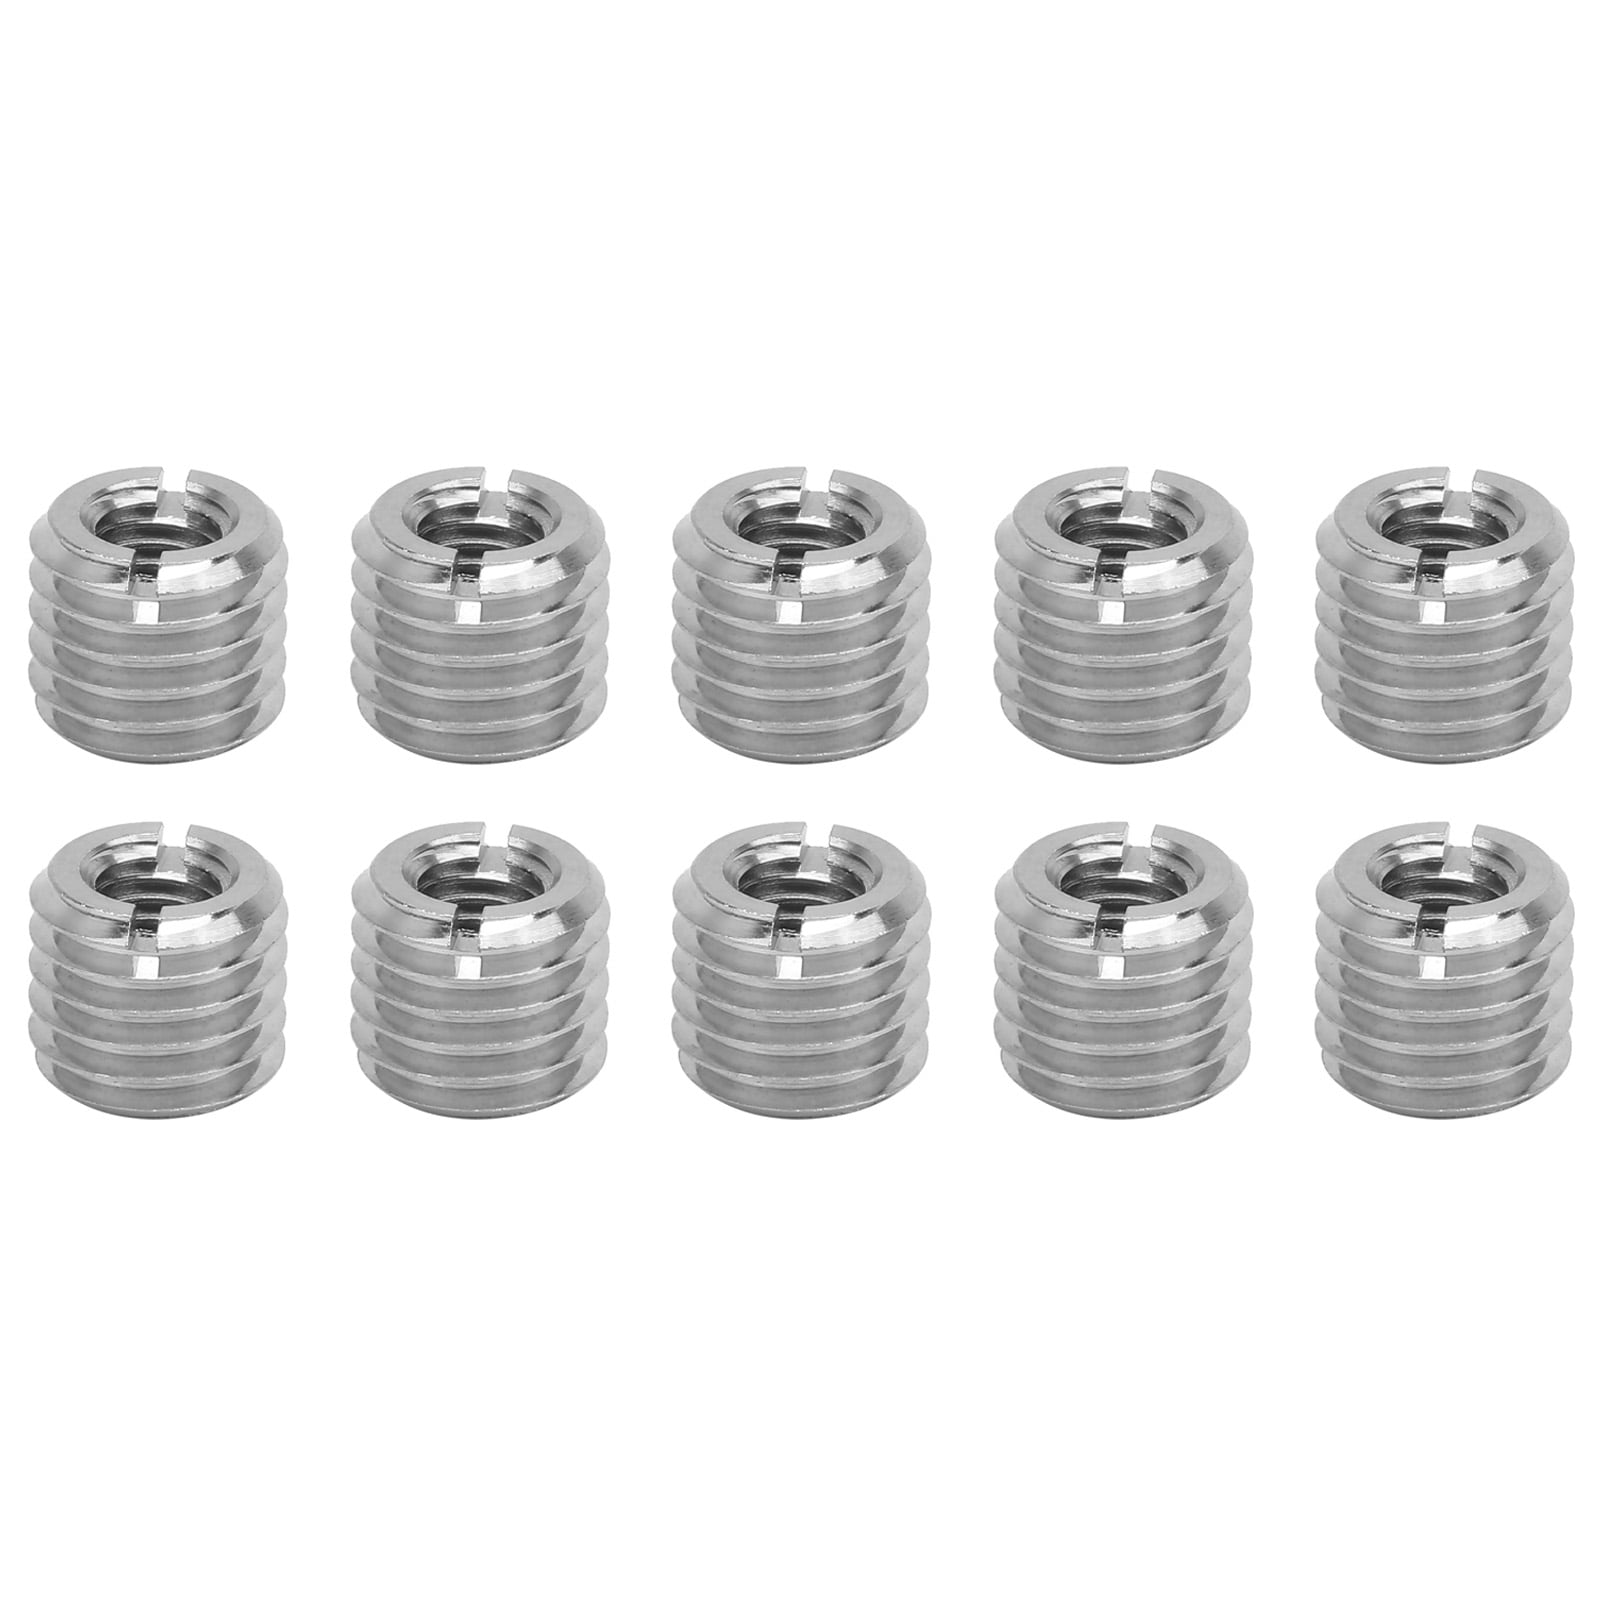 36pcs Stainless Steel SUS303 Self Tapping Thread Inserts Metric Self Tapping .. 7421247811984 